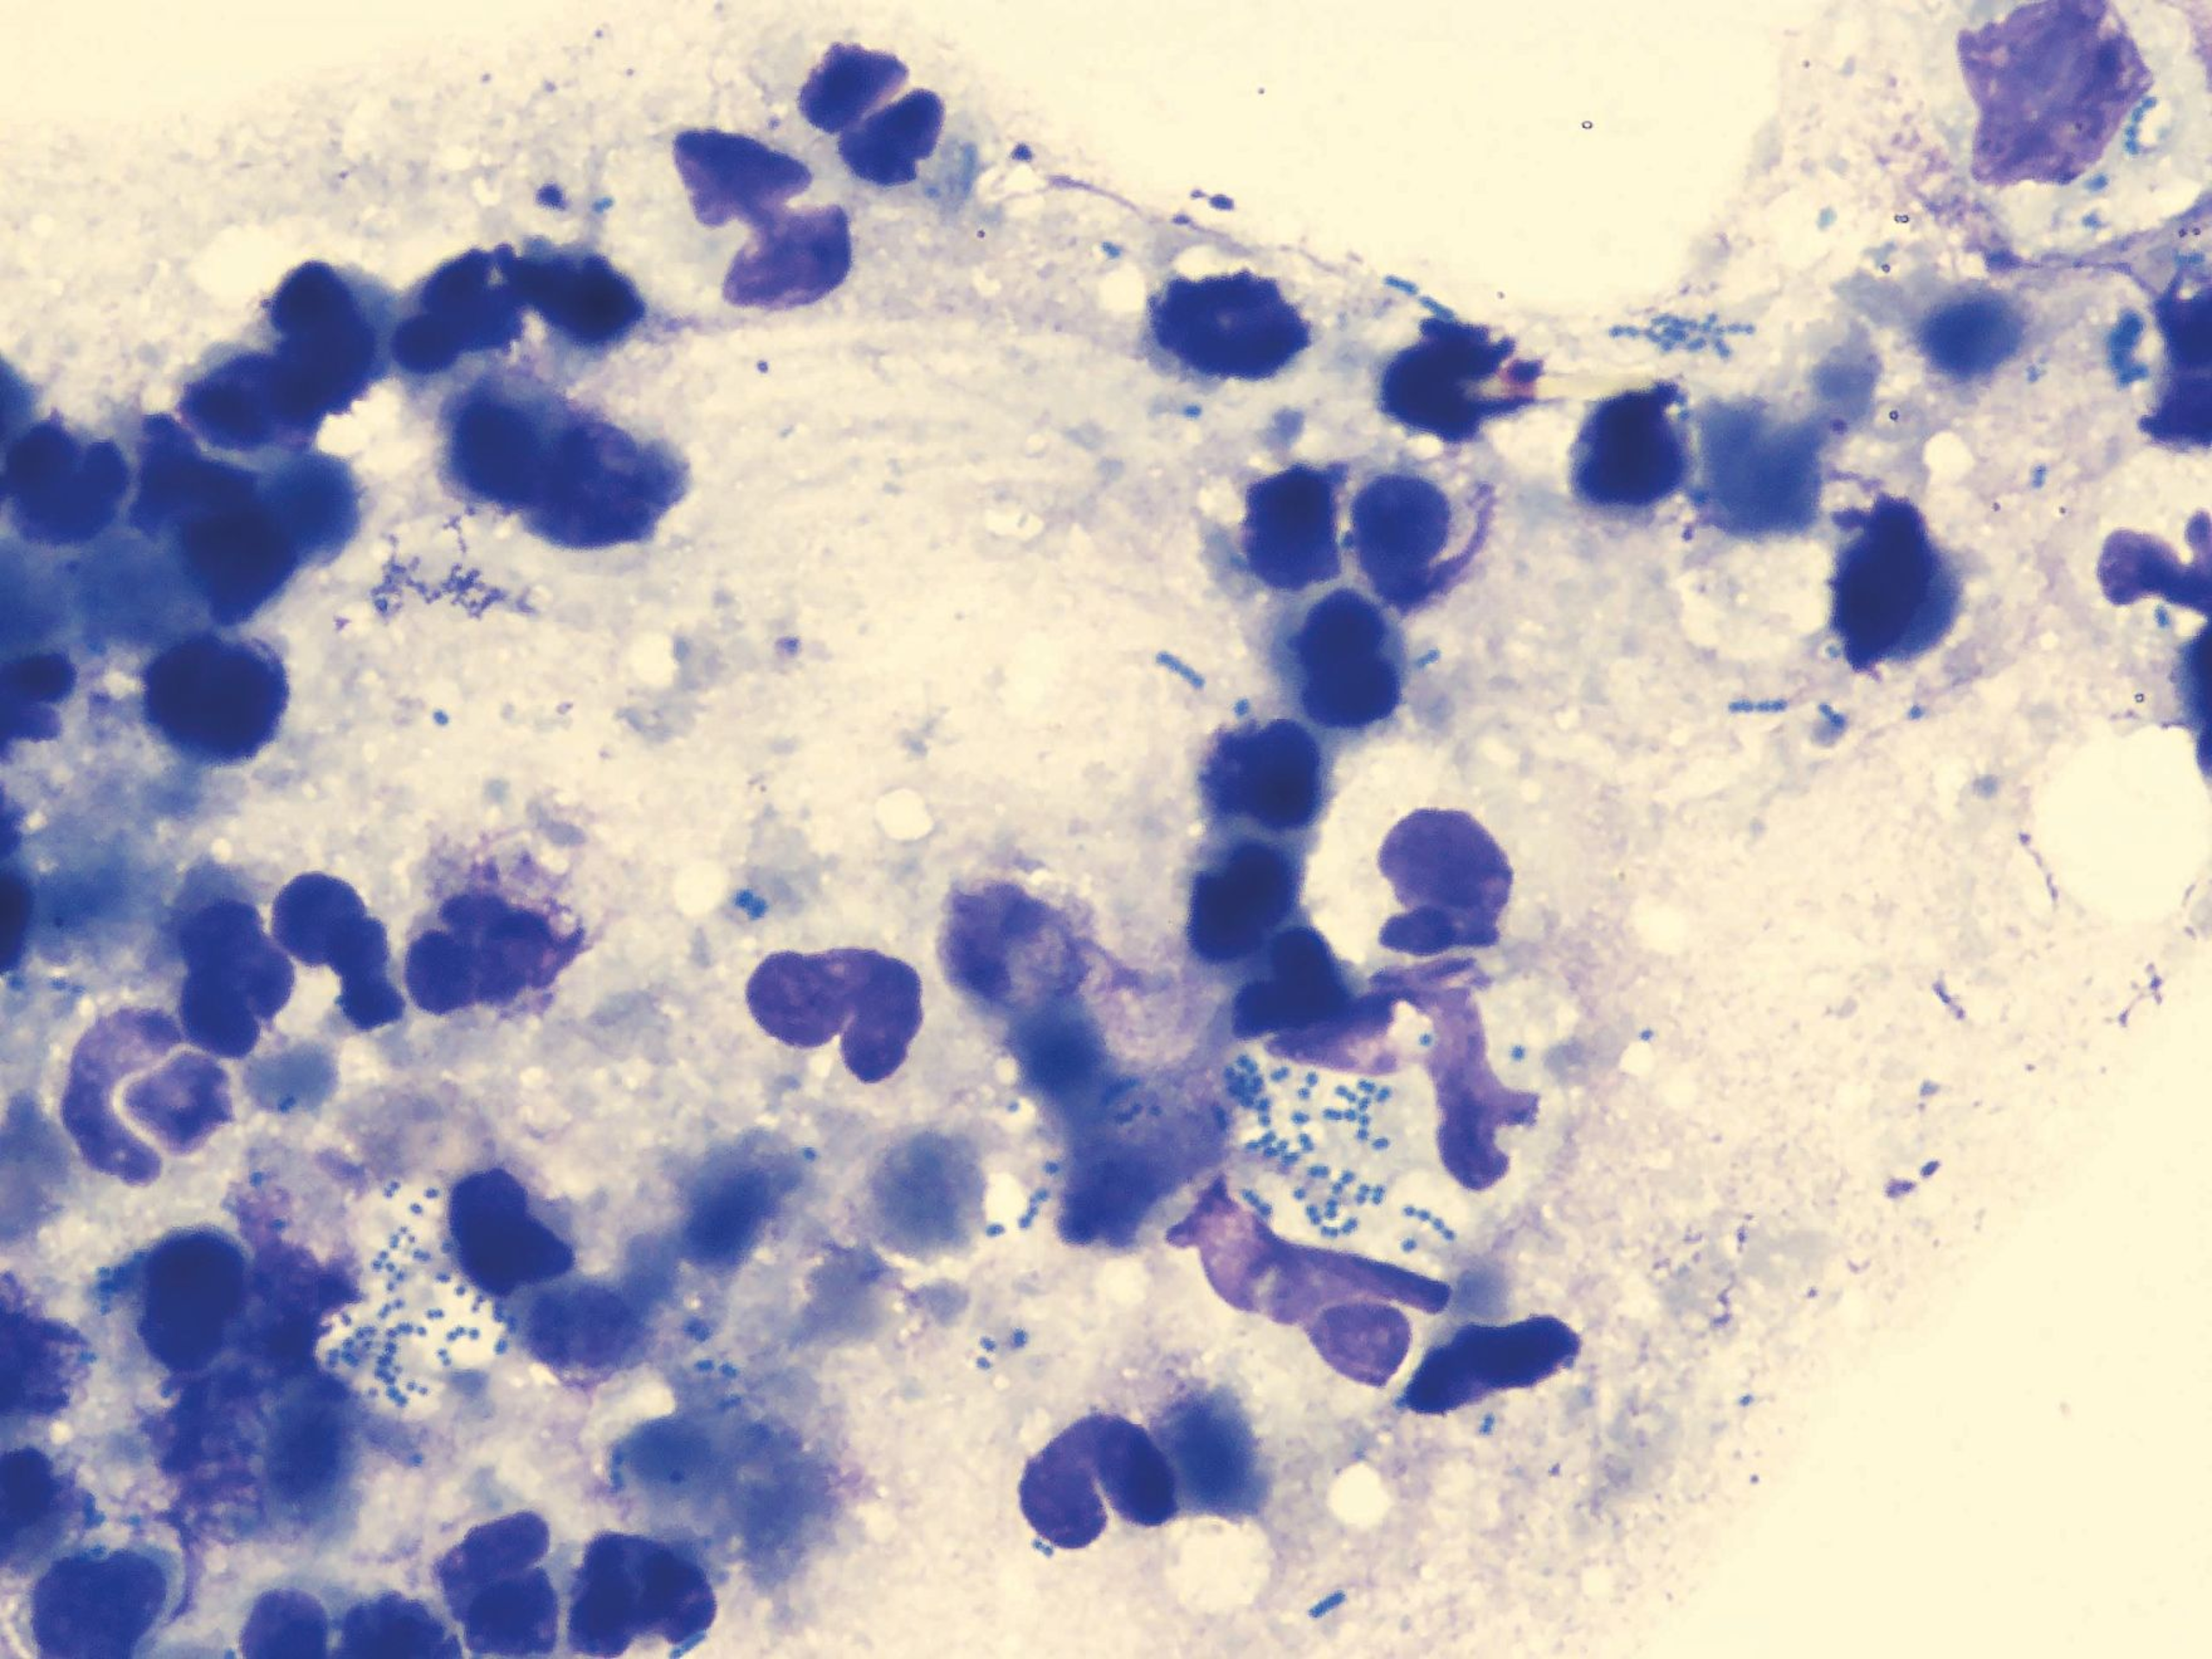 x100 oil immersion of a direct impression smear showing multiple neutrophils with intracellular.